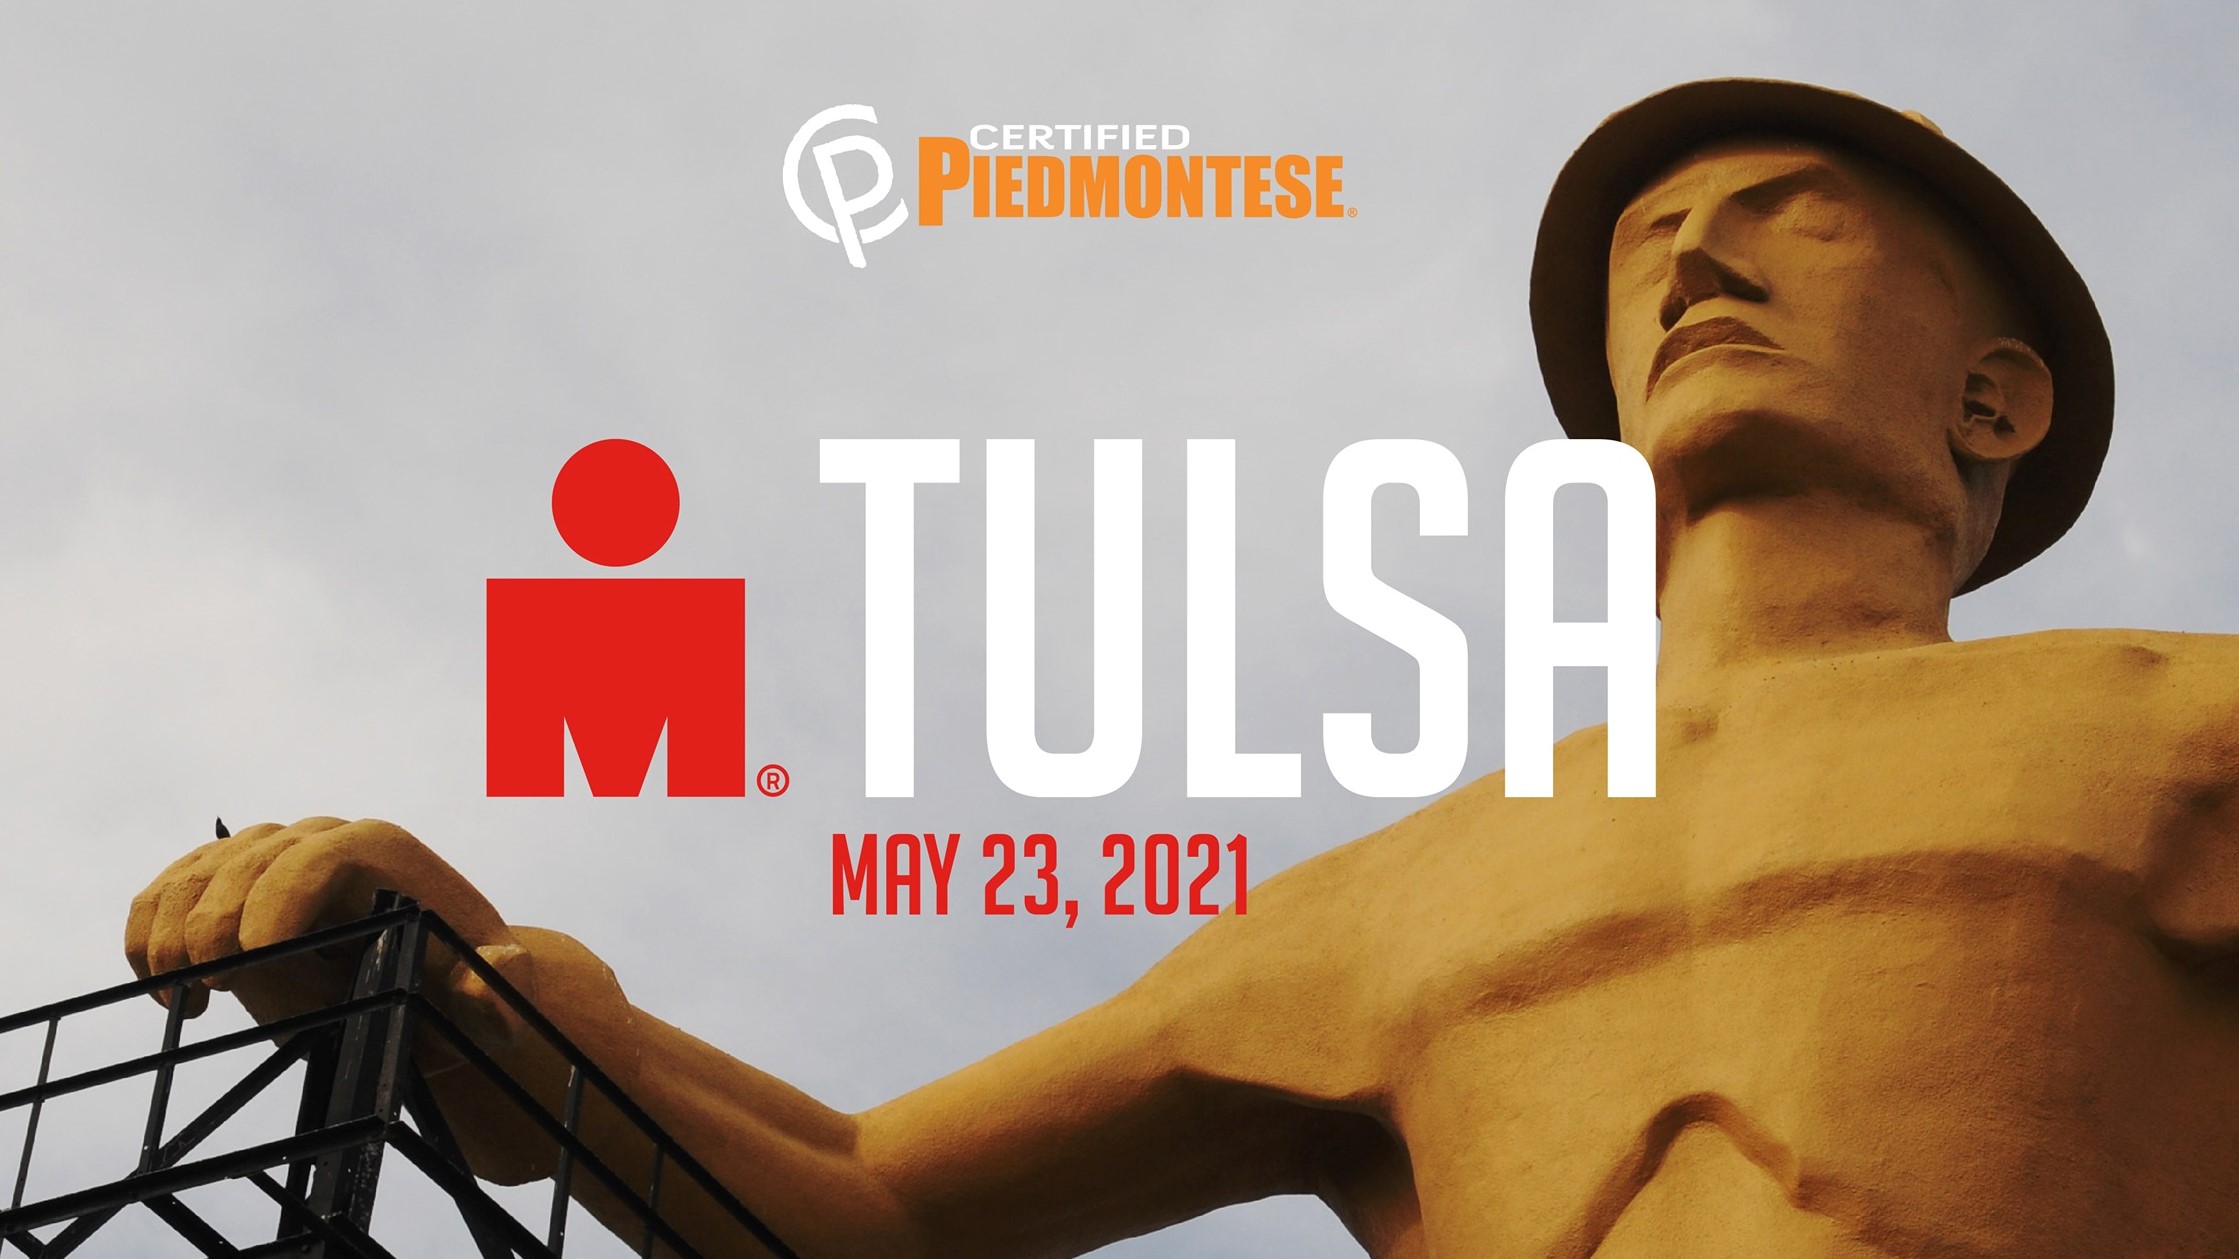 New date for Tulsa IRONMAN competition announced 102.3 KRMG